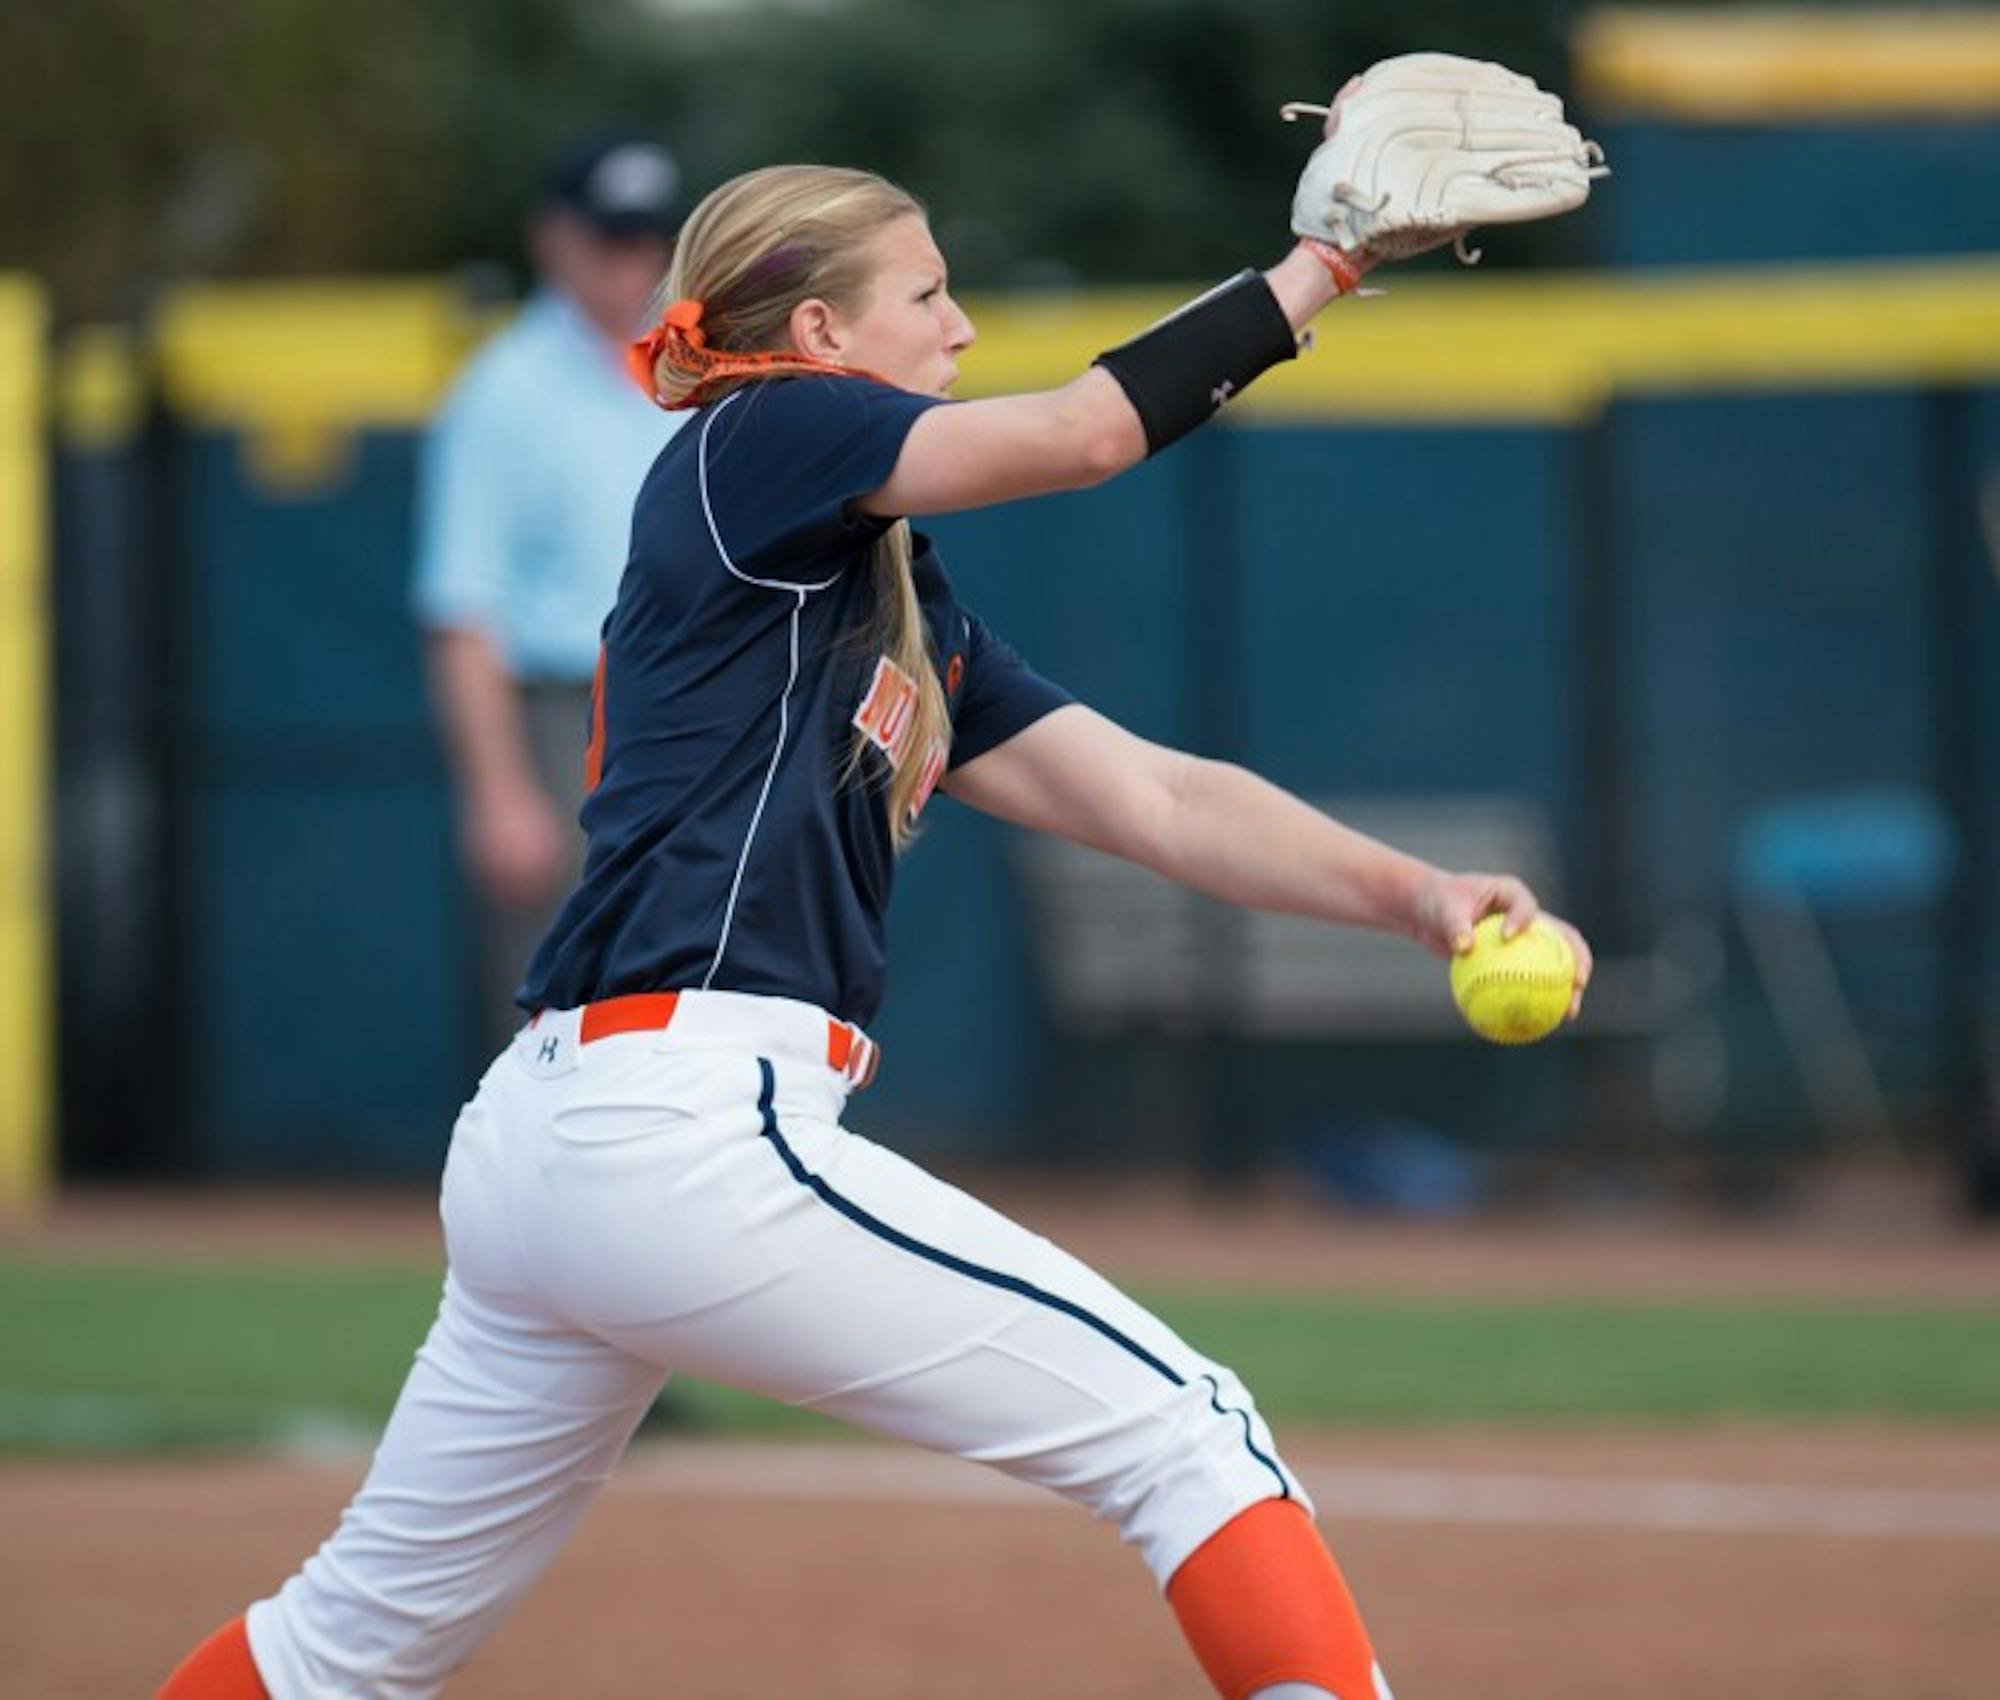 Irish senior left-hander Allie Rhodes delivers a pitch during Notre Dame’s 10-1 victory over Syracuse on April 18 at Melissa Cook Stadium. Rhodes is 3-2 with a 3.84 ERA and 37 strikeouts in seven appearances.